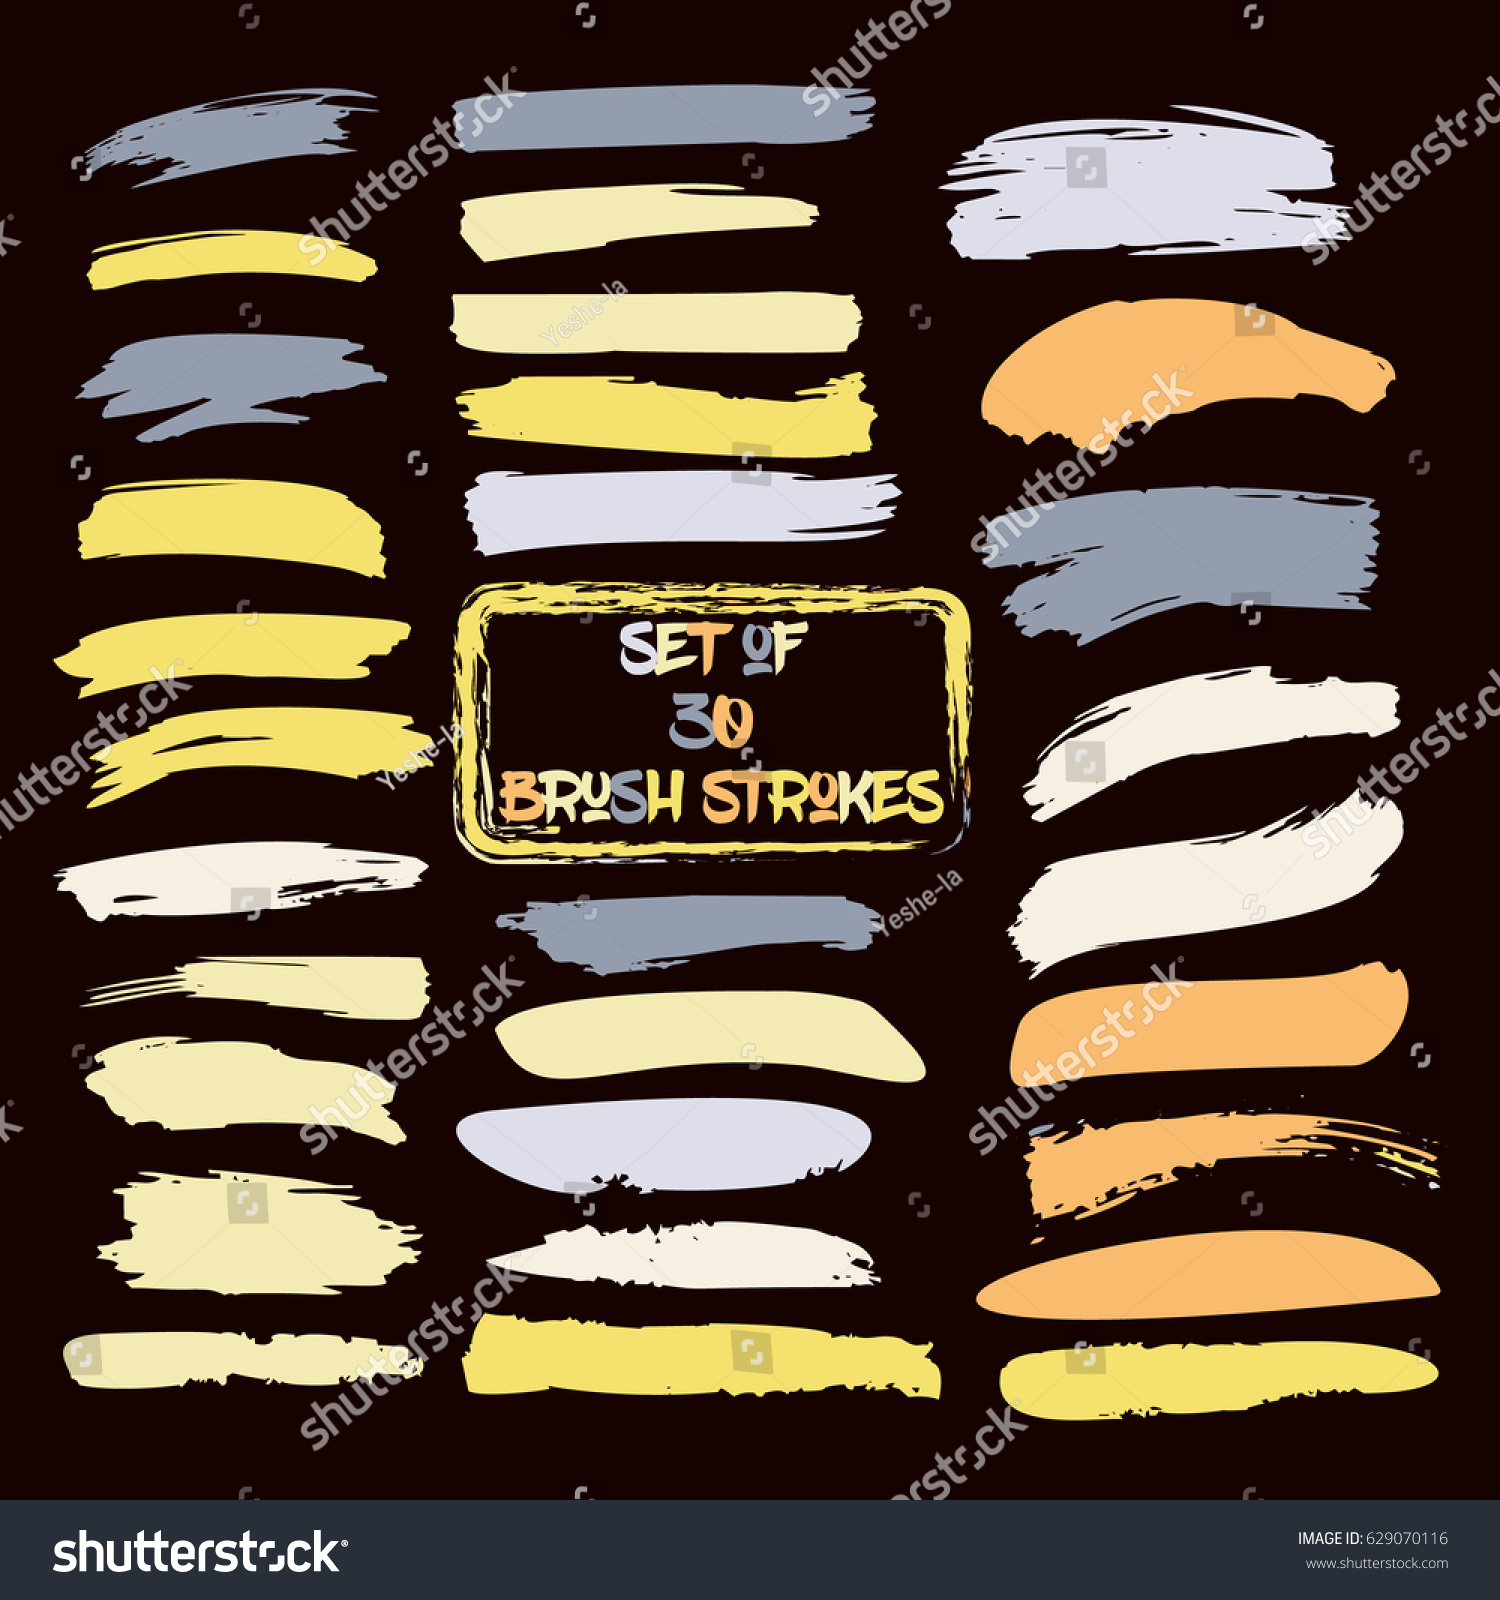 SVG of Set of thirty trendy yellow, ochre, and grey vector brush strokes or backgrounds. Hand painted ink brush strokes, brushes, and lines. Dirty grunge artistic design elements. Text backgrounds. svg